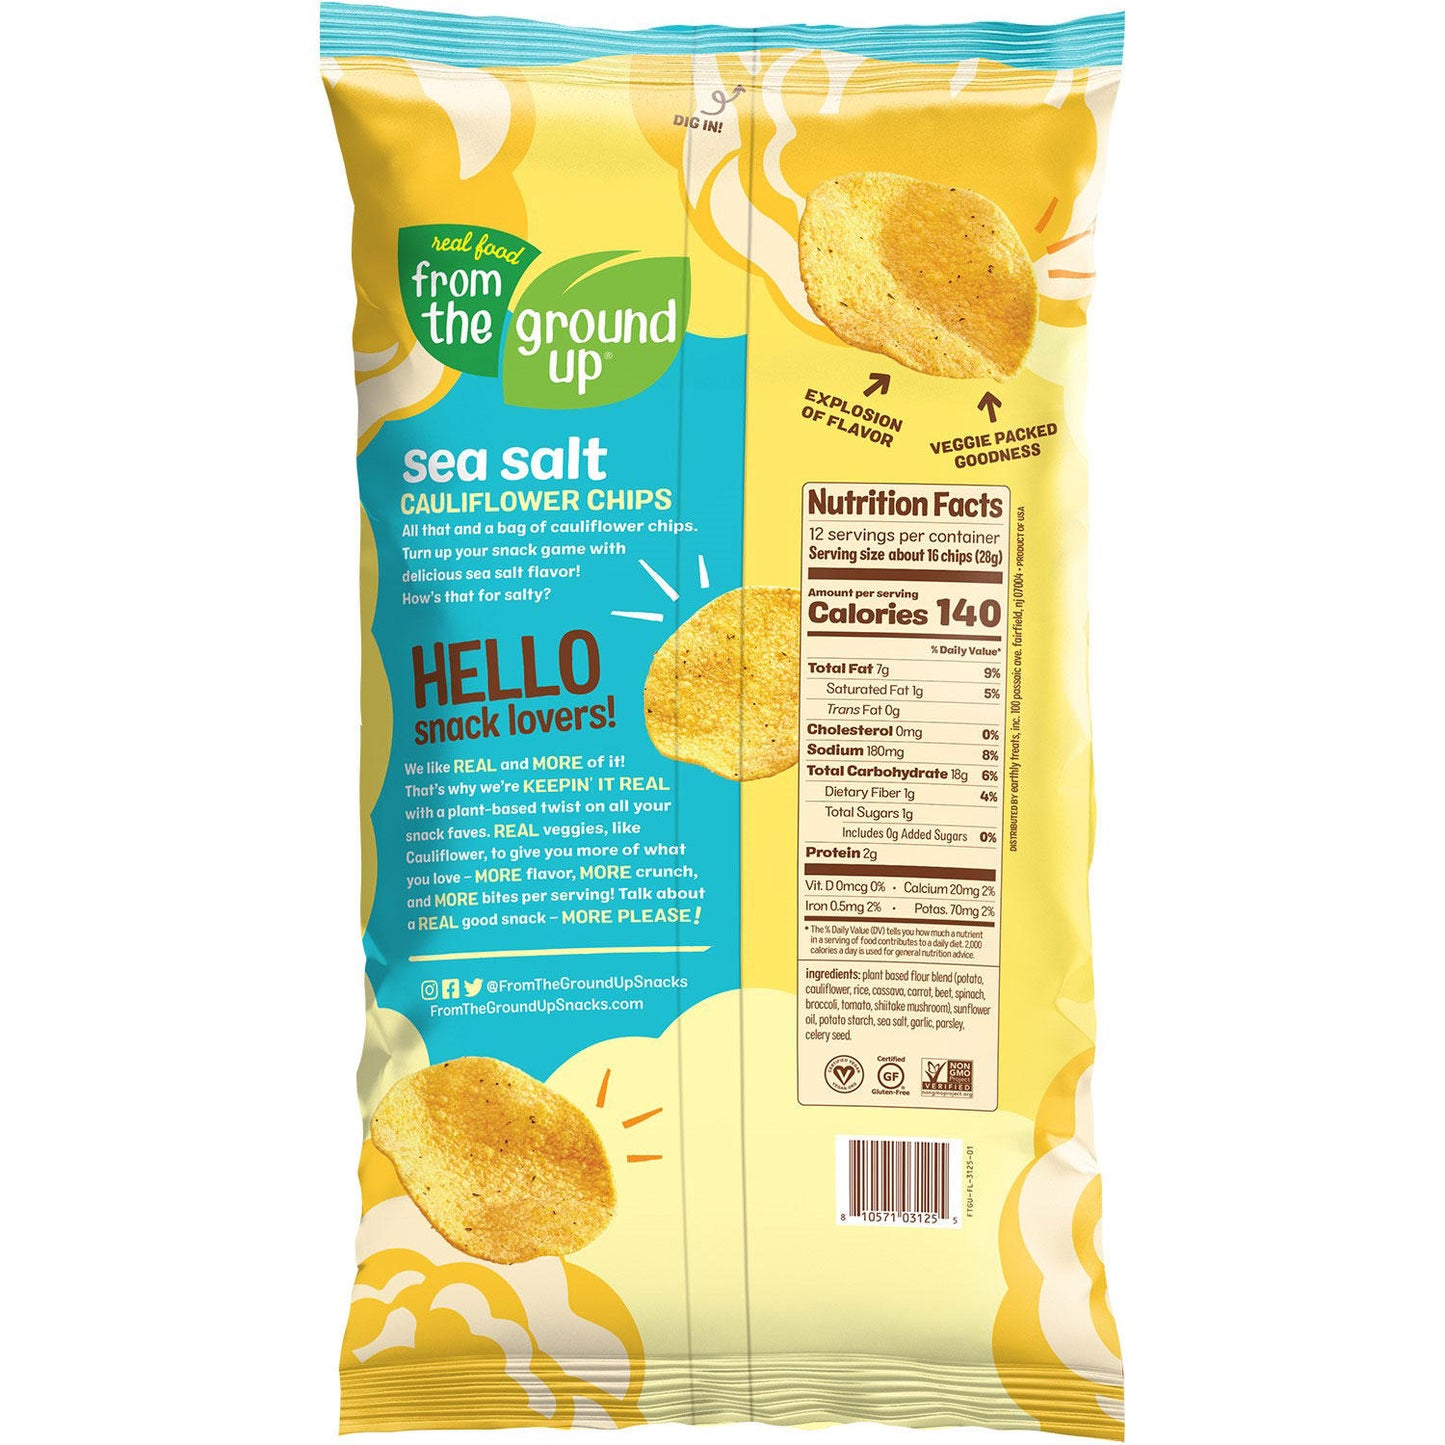 Real Food From The Ground Up Cauliflower Sea Salt Chips (12 oz.)